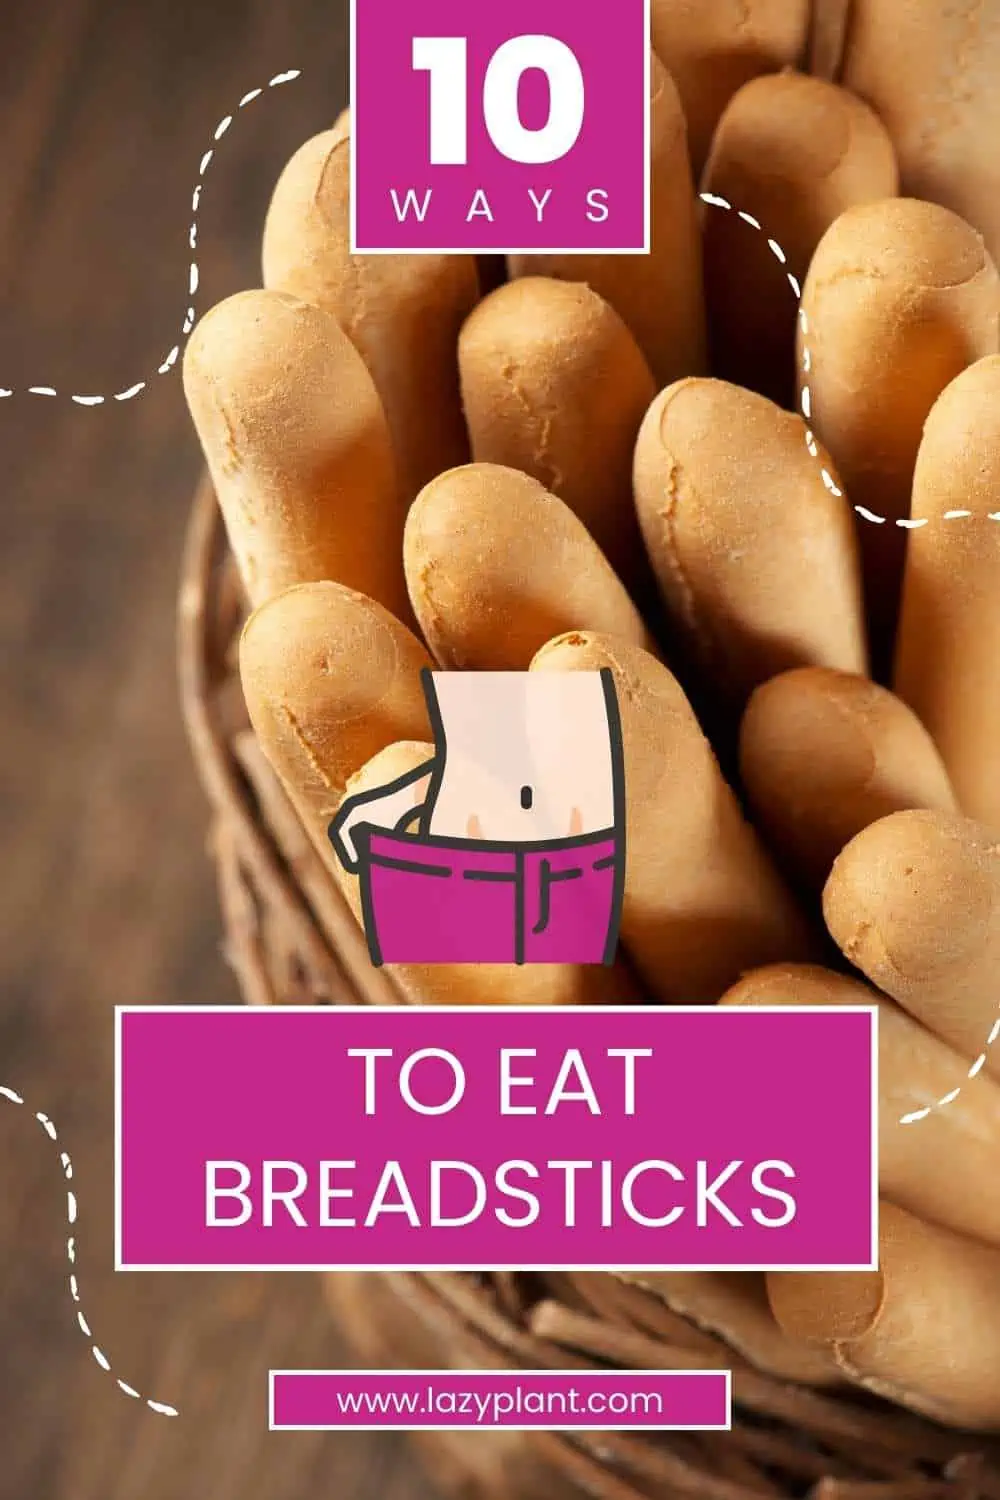 Are breadsticks healthy for weight loss?